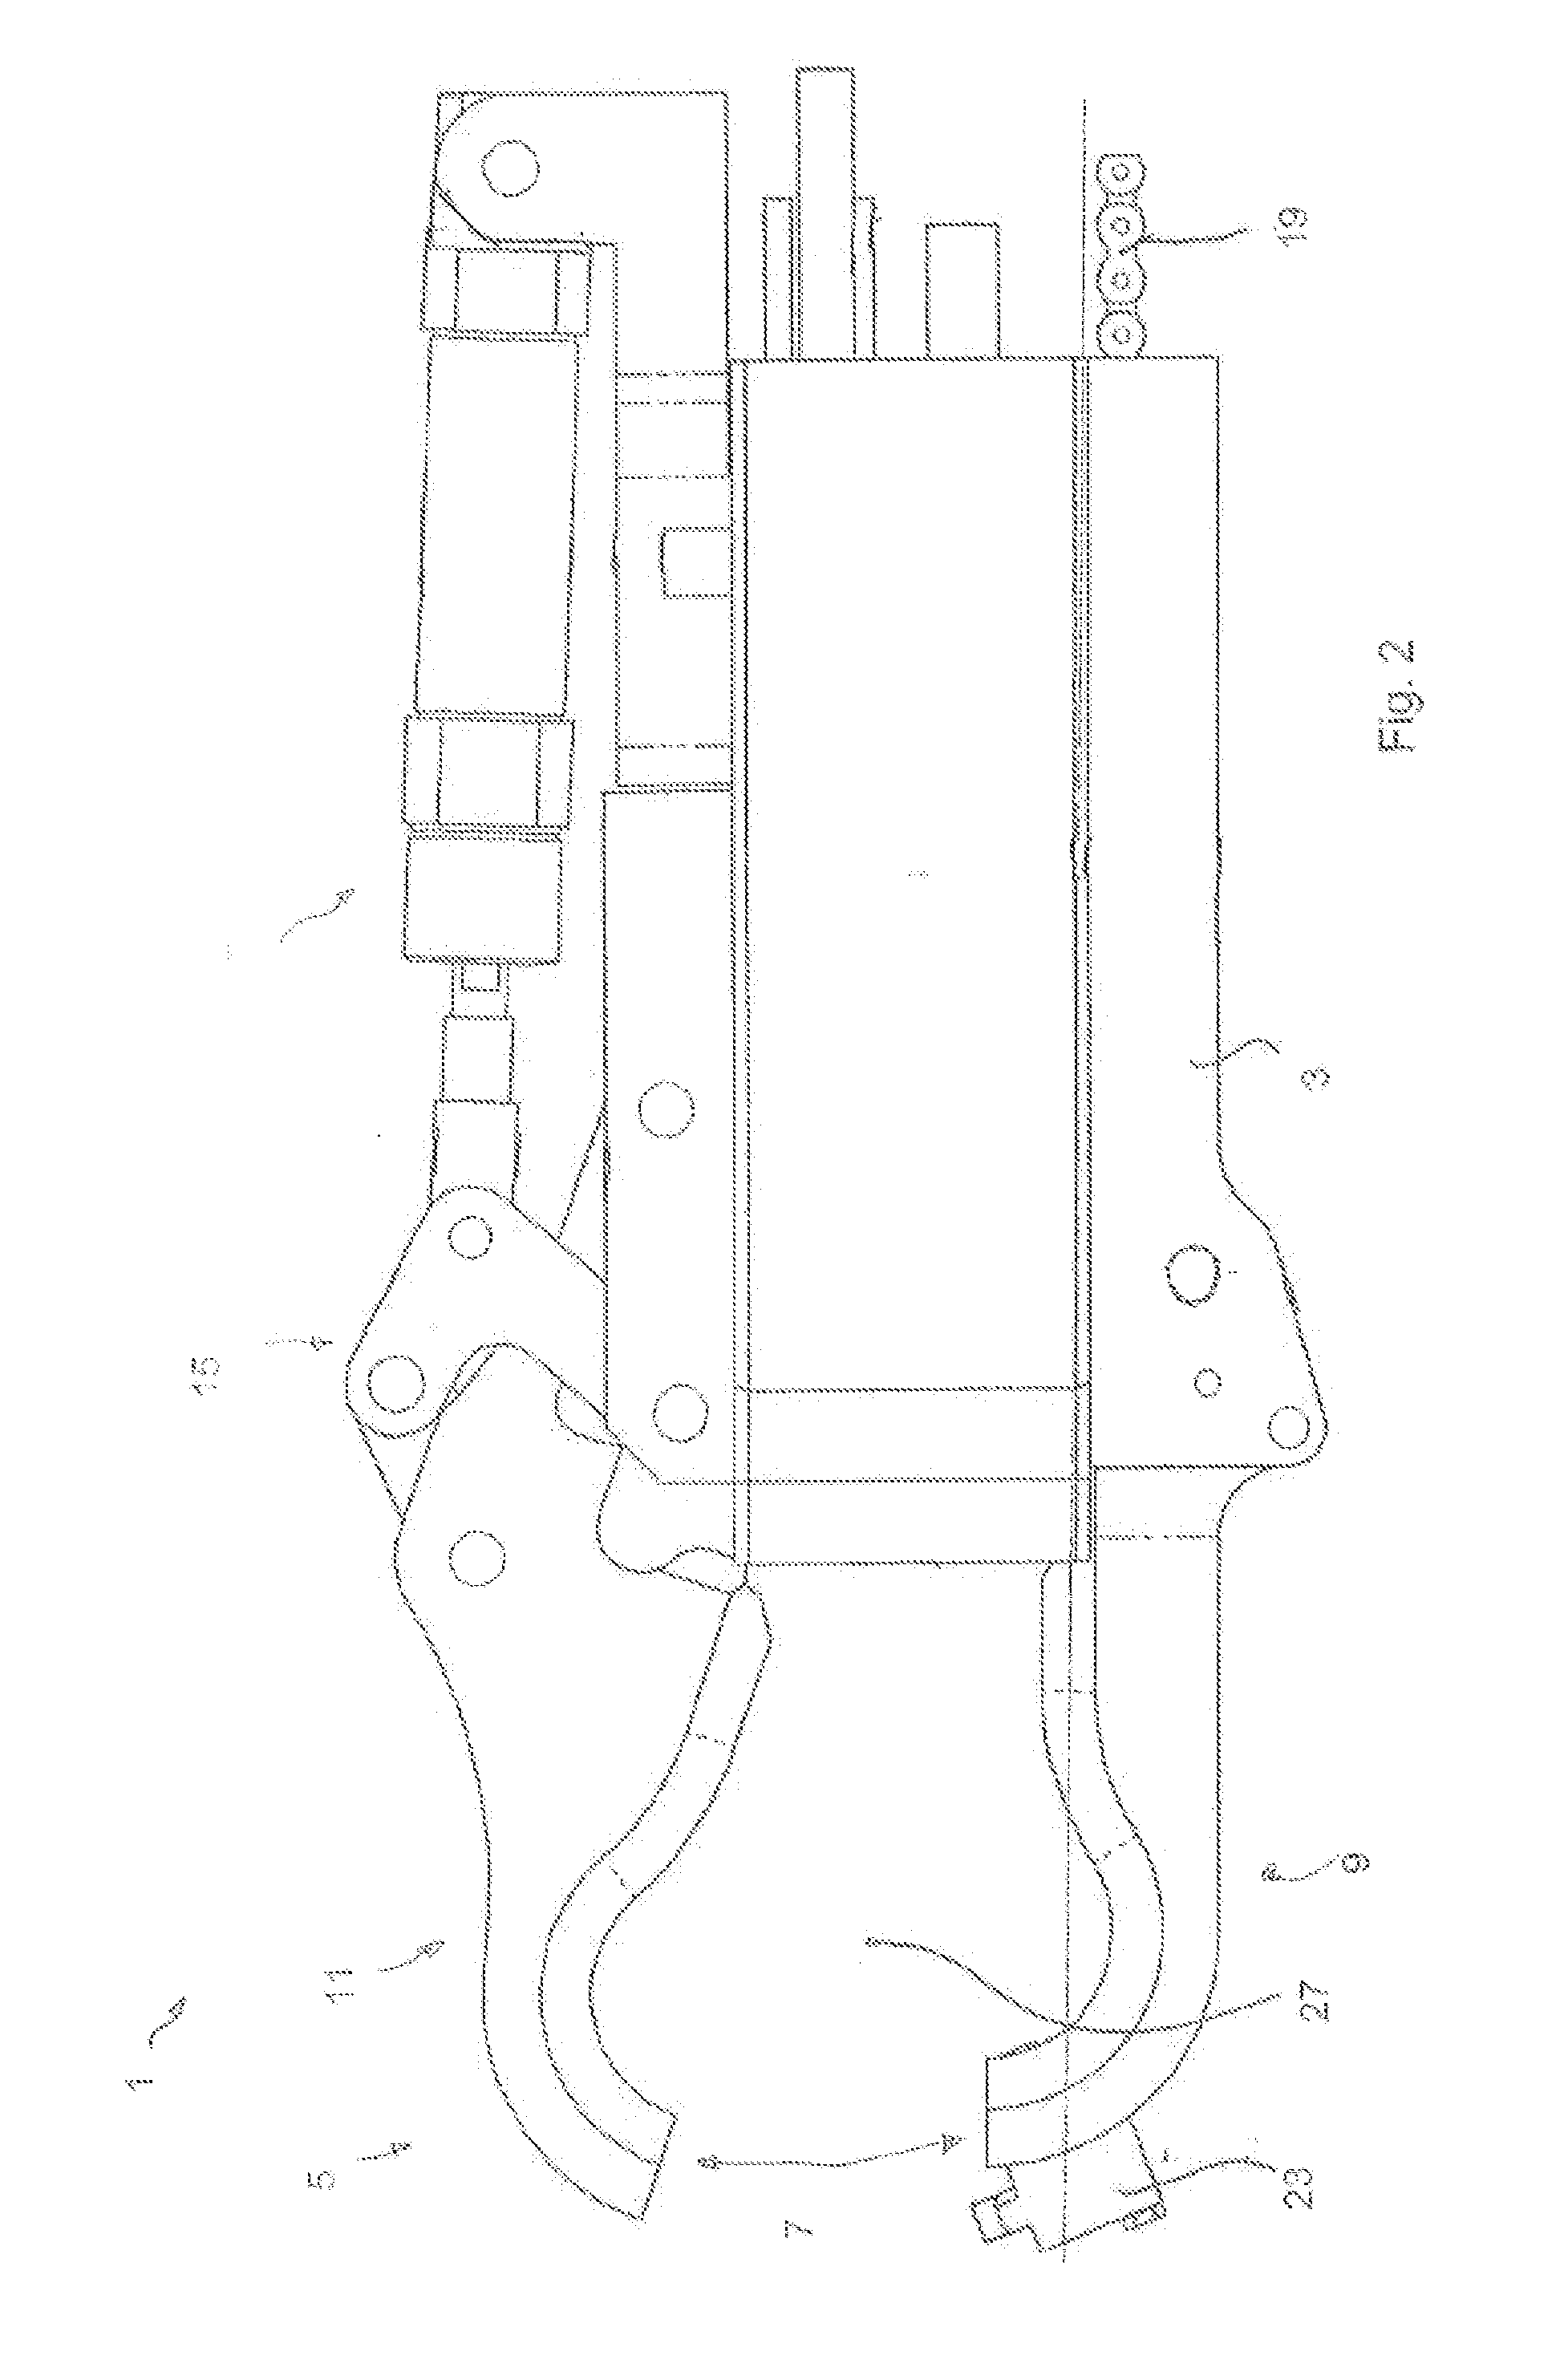 Device and method for automatically twisting metal wires, in particular for connecting adjacent, preferably mutually intersecting structure elements